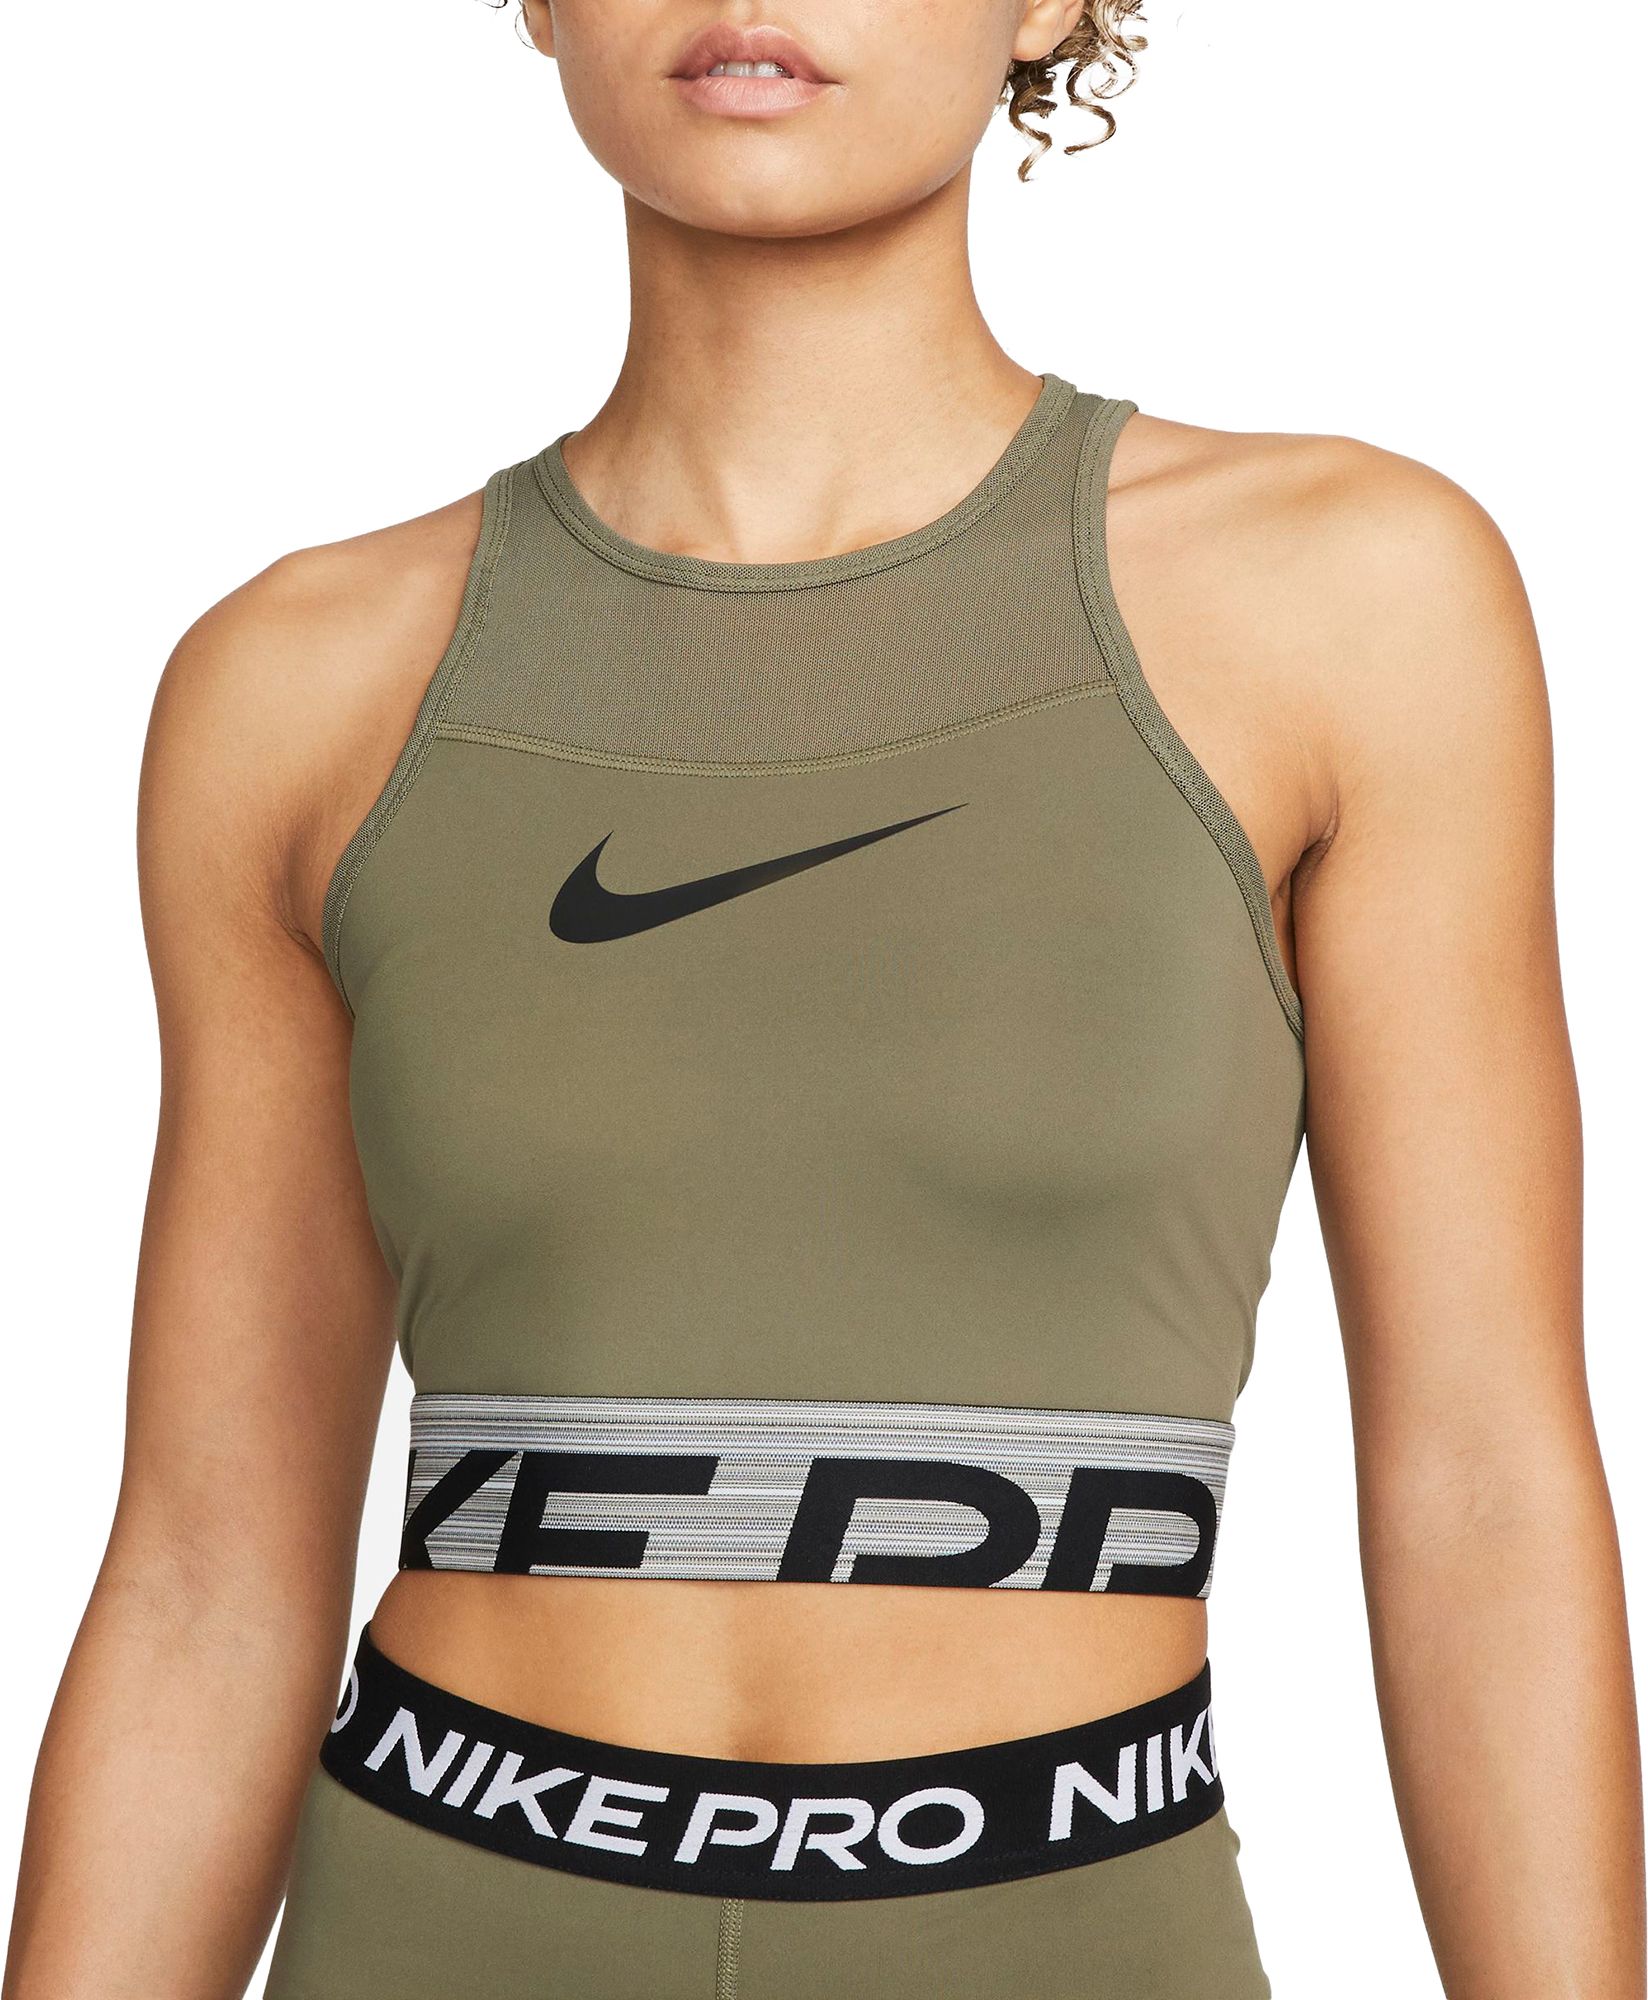 XS NIKE PRO Dri-Fit Sport Bra for girls in Reversible Teal or